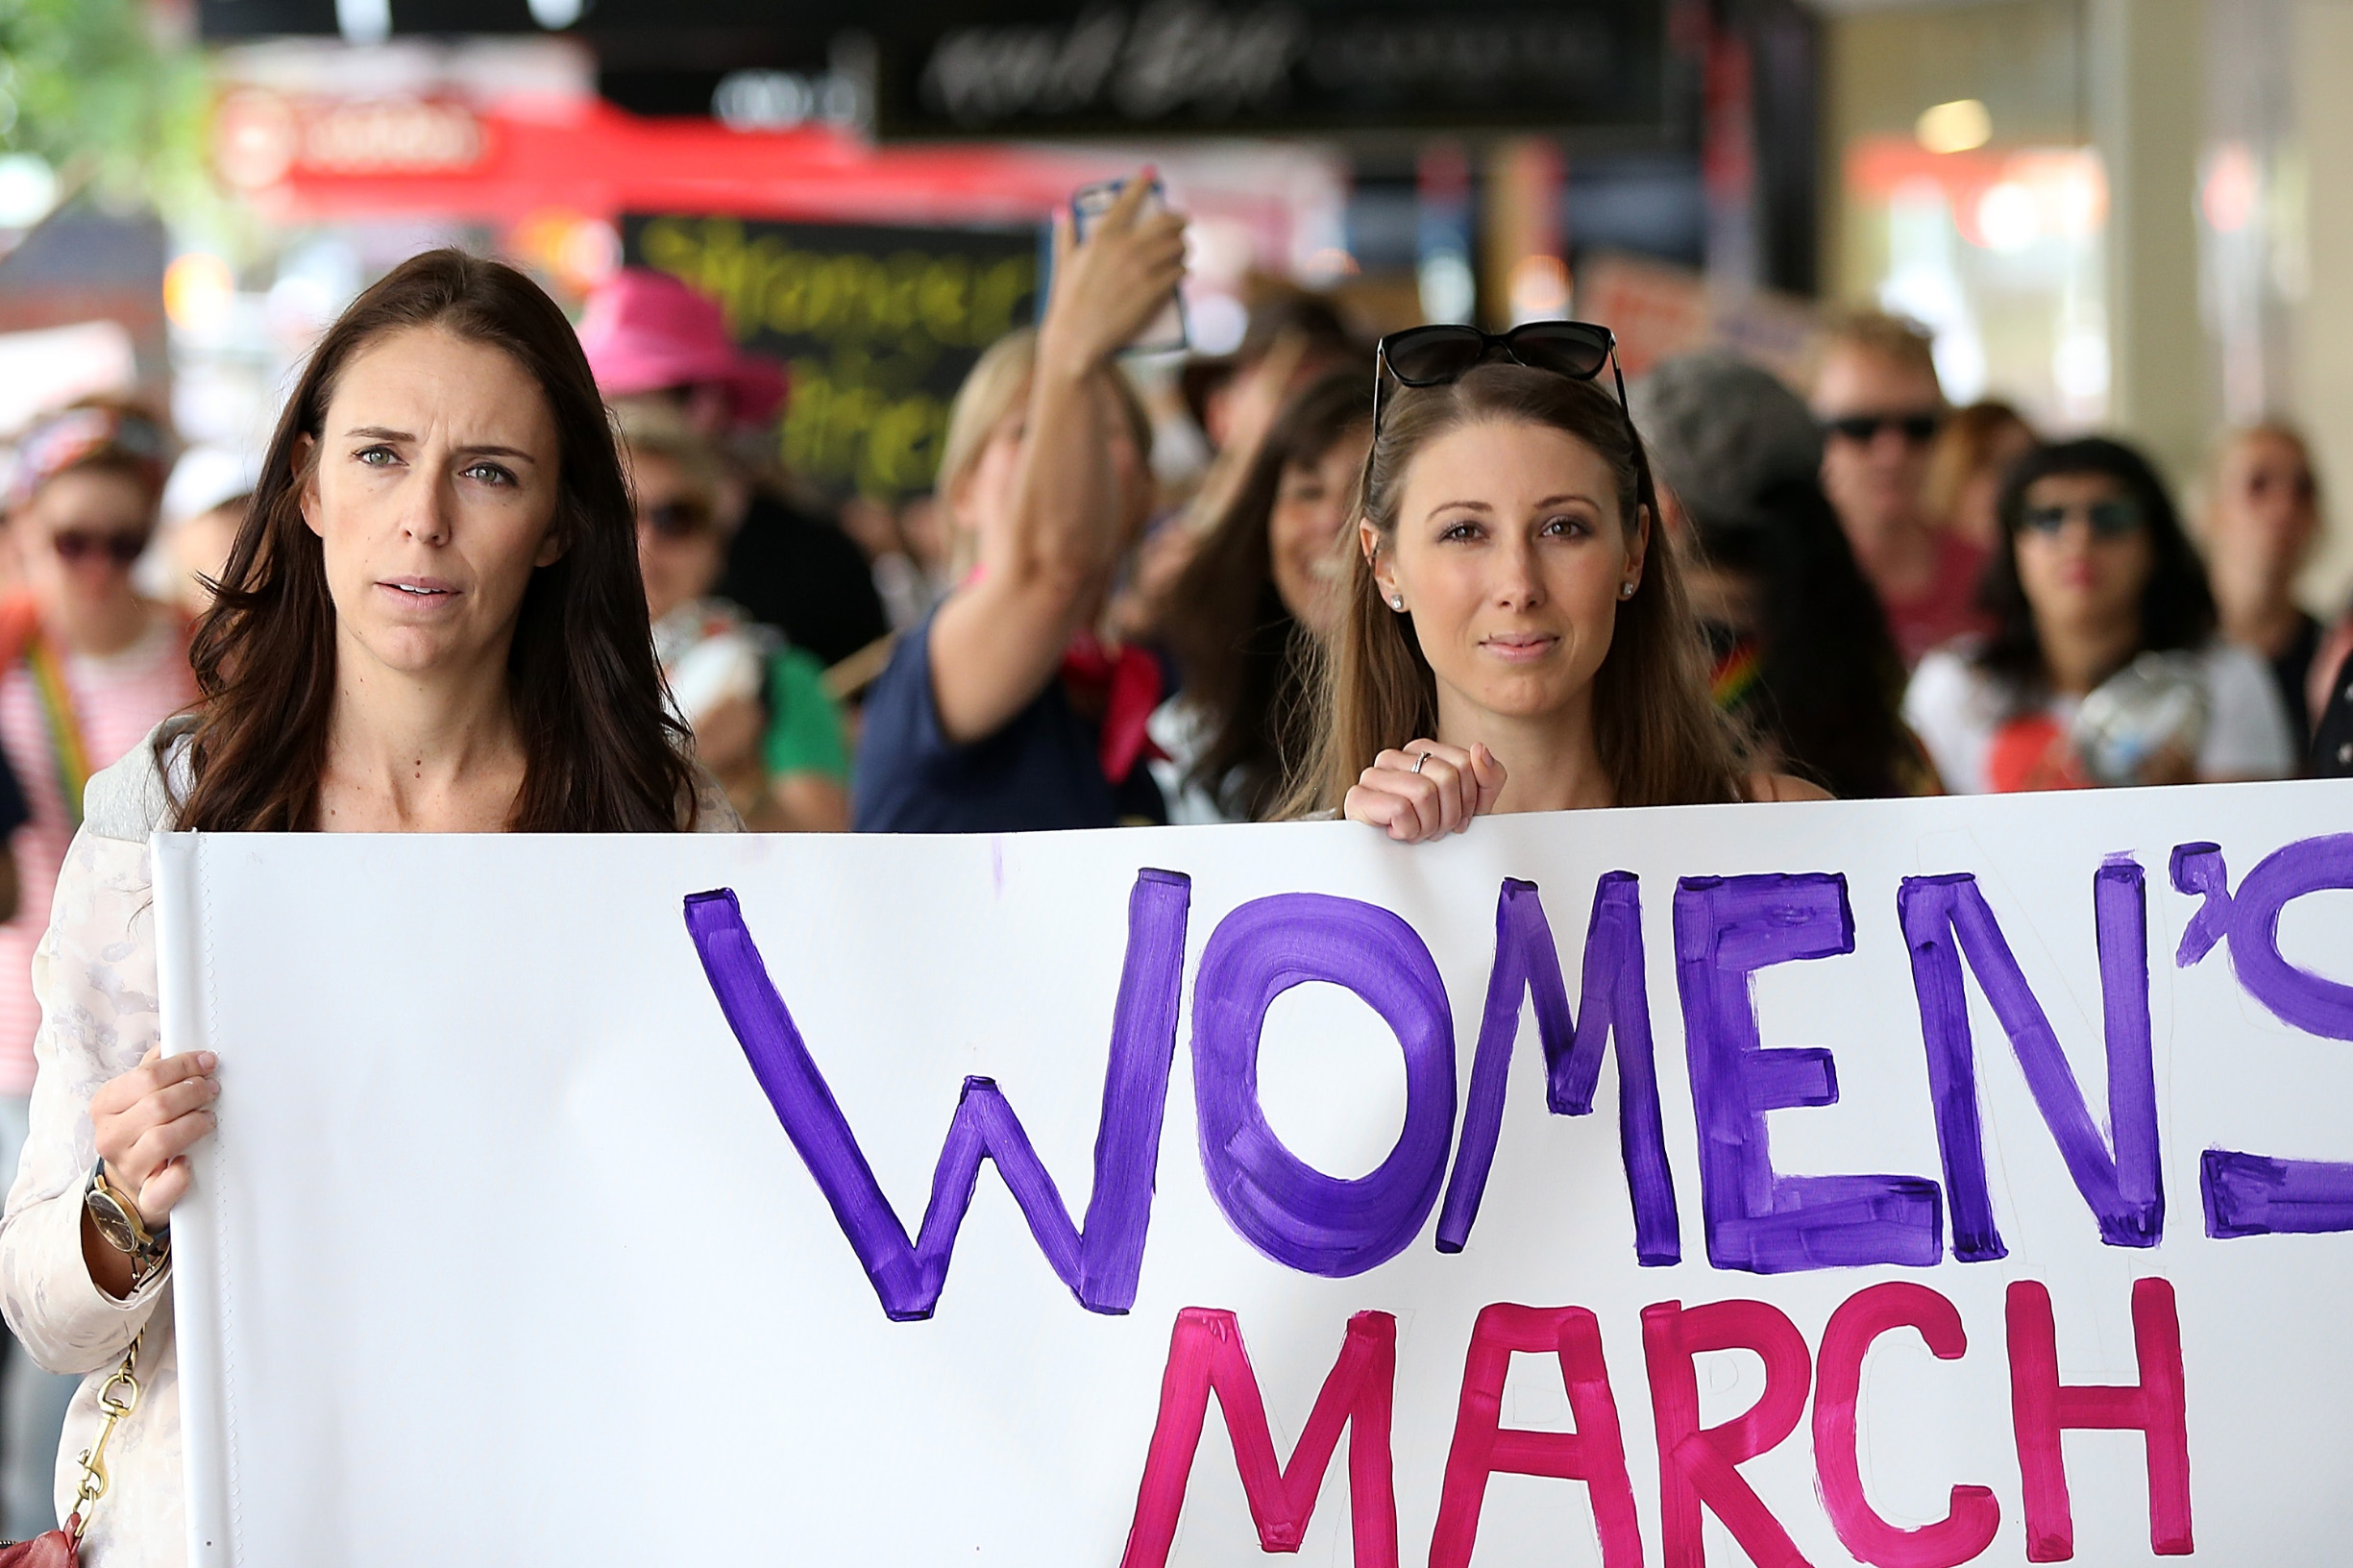 AUCKLAND, NEW ZEALAND - JANUARY 21:  Labour MP Jacinda Ardern (L) and musician, writer, activist Lizzie Marvelly (C) join thousands of people marching up Queen Street on January 21, 2017 in Auckland, New Zealand. The marches in New Zealand were organised to show solidarity with those marching on Washington DC and around the world in defense of women's rights and human rights.  (Photo by Fiona Goodall/Getty Images)